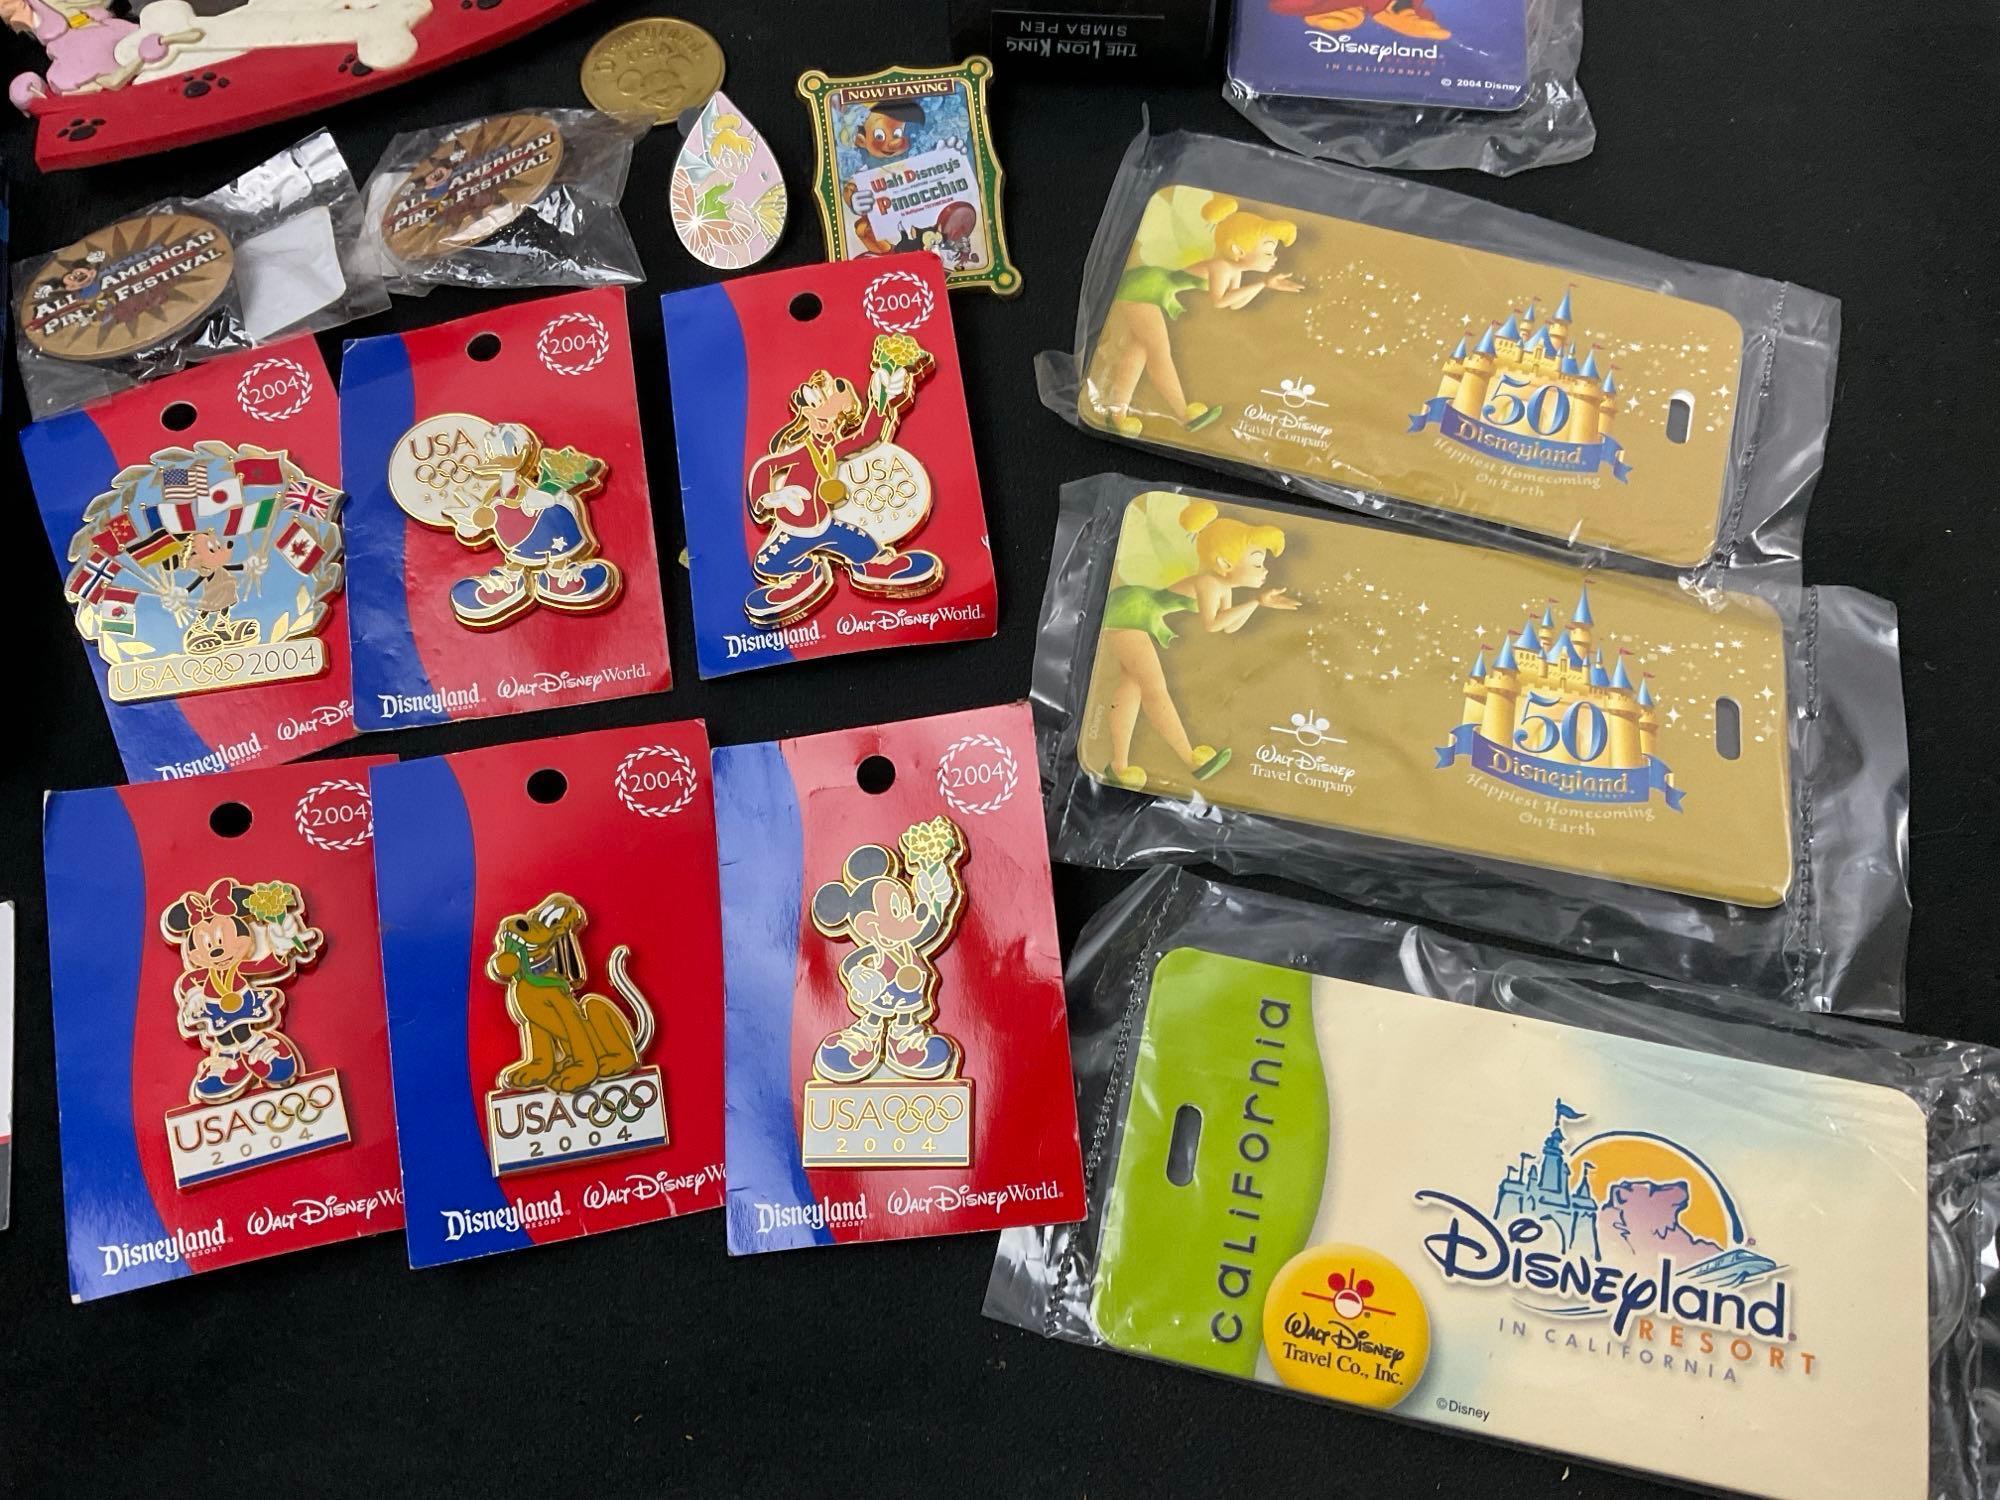 Assorted Disneyland Pins, Smashed Coins, 2008 LE Pin Set w/ box signed by Monty Maldovan